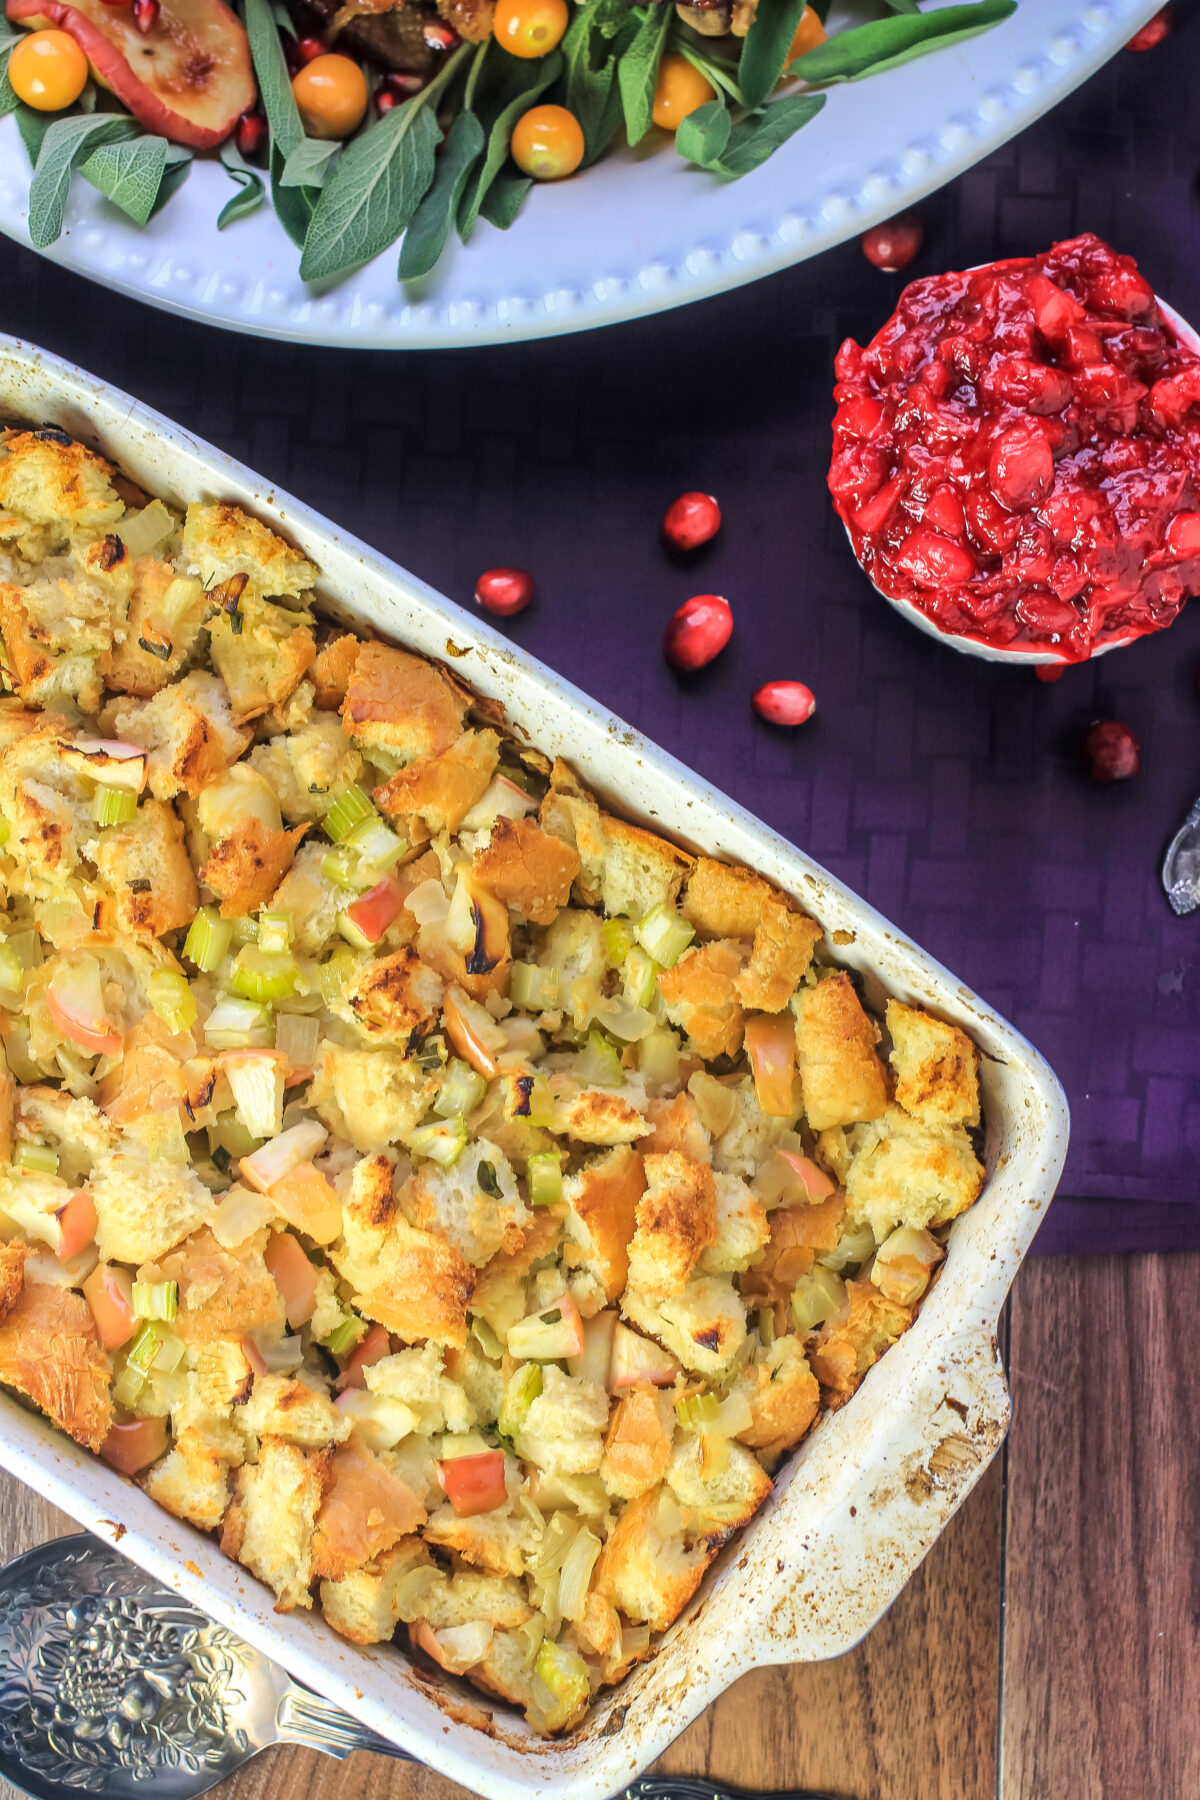 This recipe for Apple and Sage Stuffing is moist, fragrant, and absolutely delicious. It's a perfect Thanksgiving side dish.